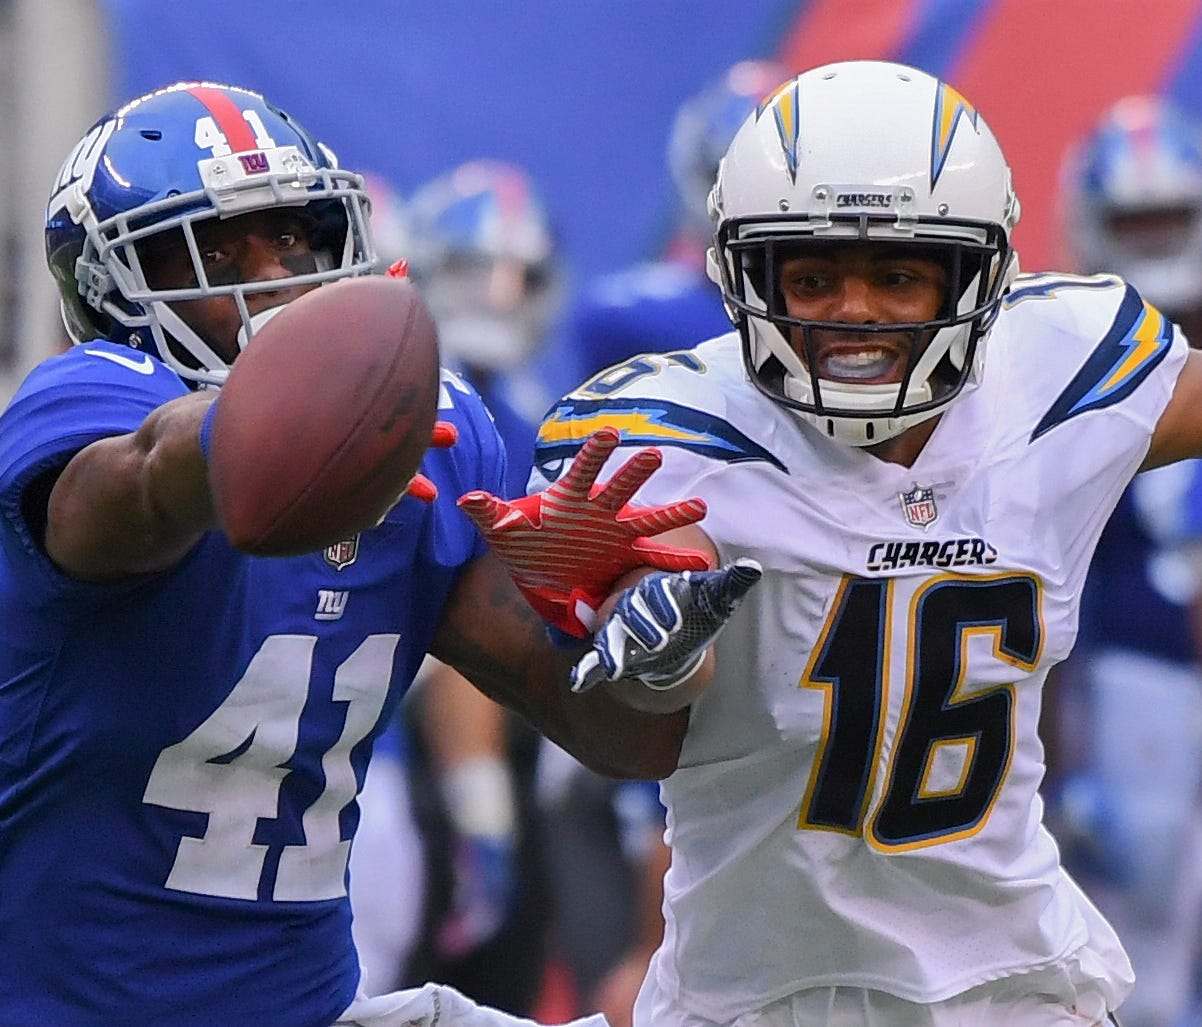 Los Angeles Chargers wide receiver Tyrell Williams (16) and New York Giants cornerback Dominique Rodgers-Cromartie (41) fight for a pass in the second half, falling incomplete at MetLife Stadium.